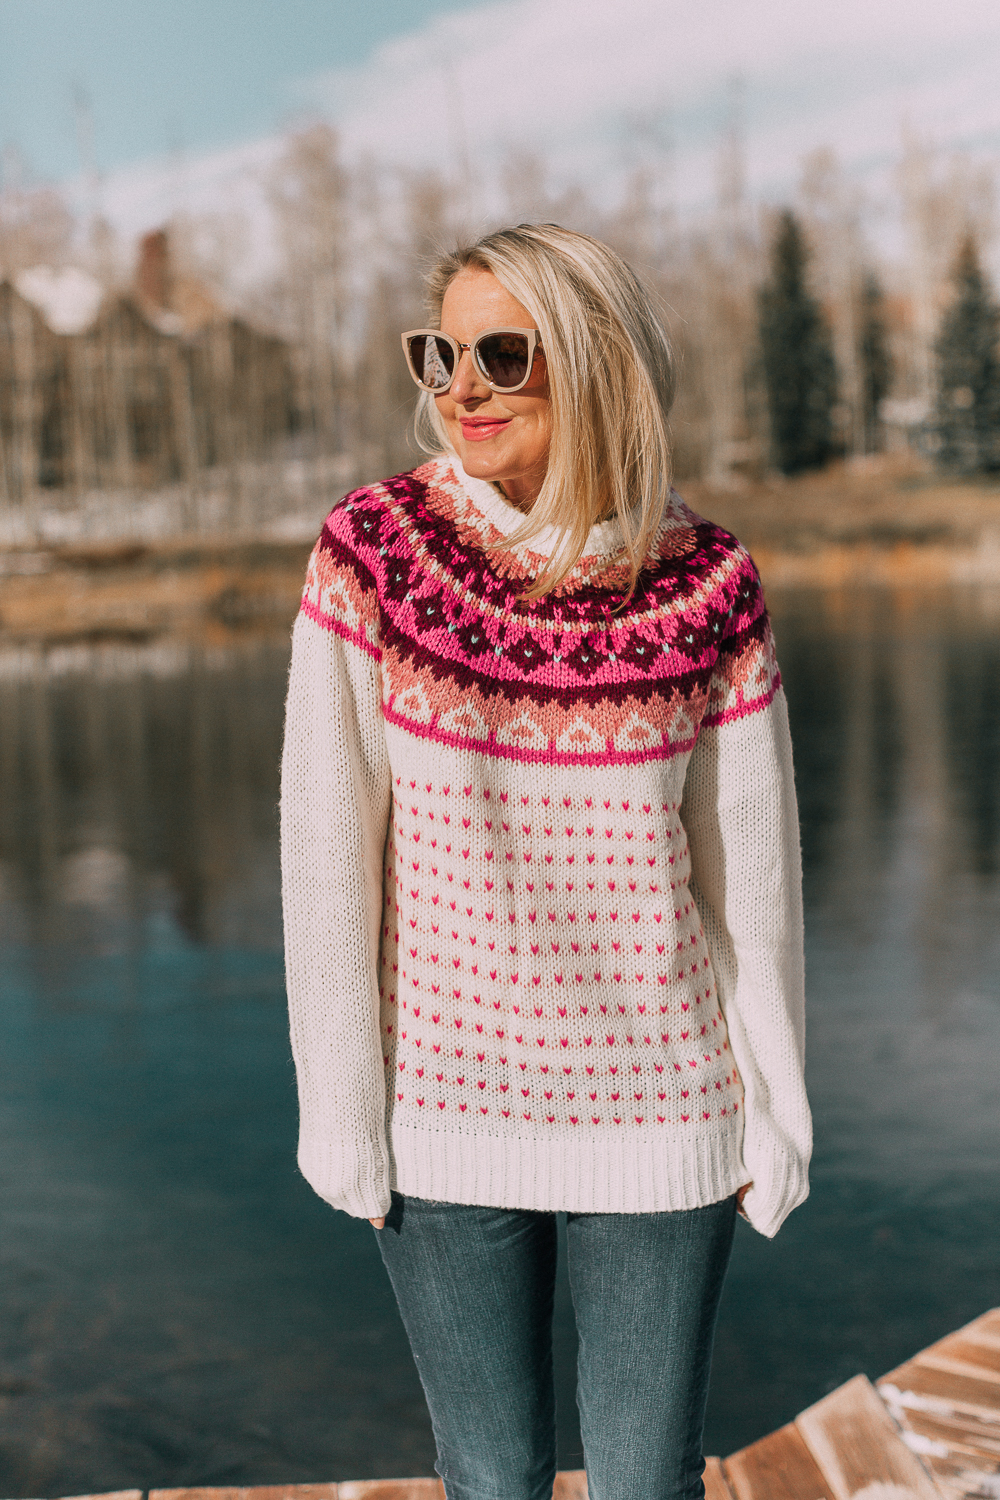 Best sweaters for fall for women 2018 featuring a pink and white fairisle sweater from JCPenney on blonde fashion blogger